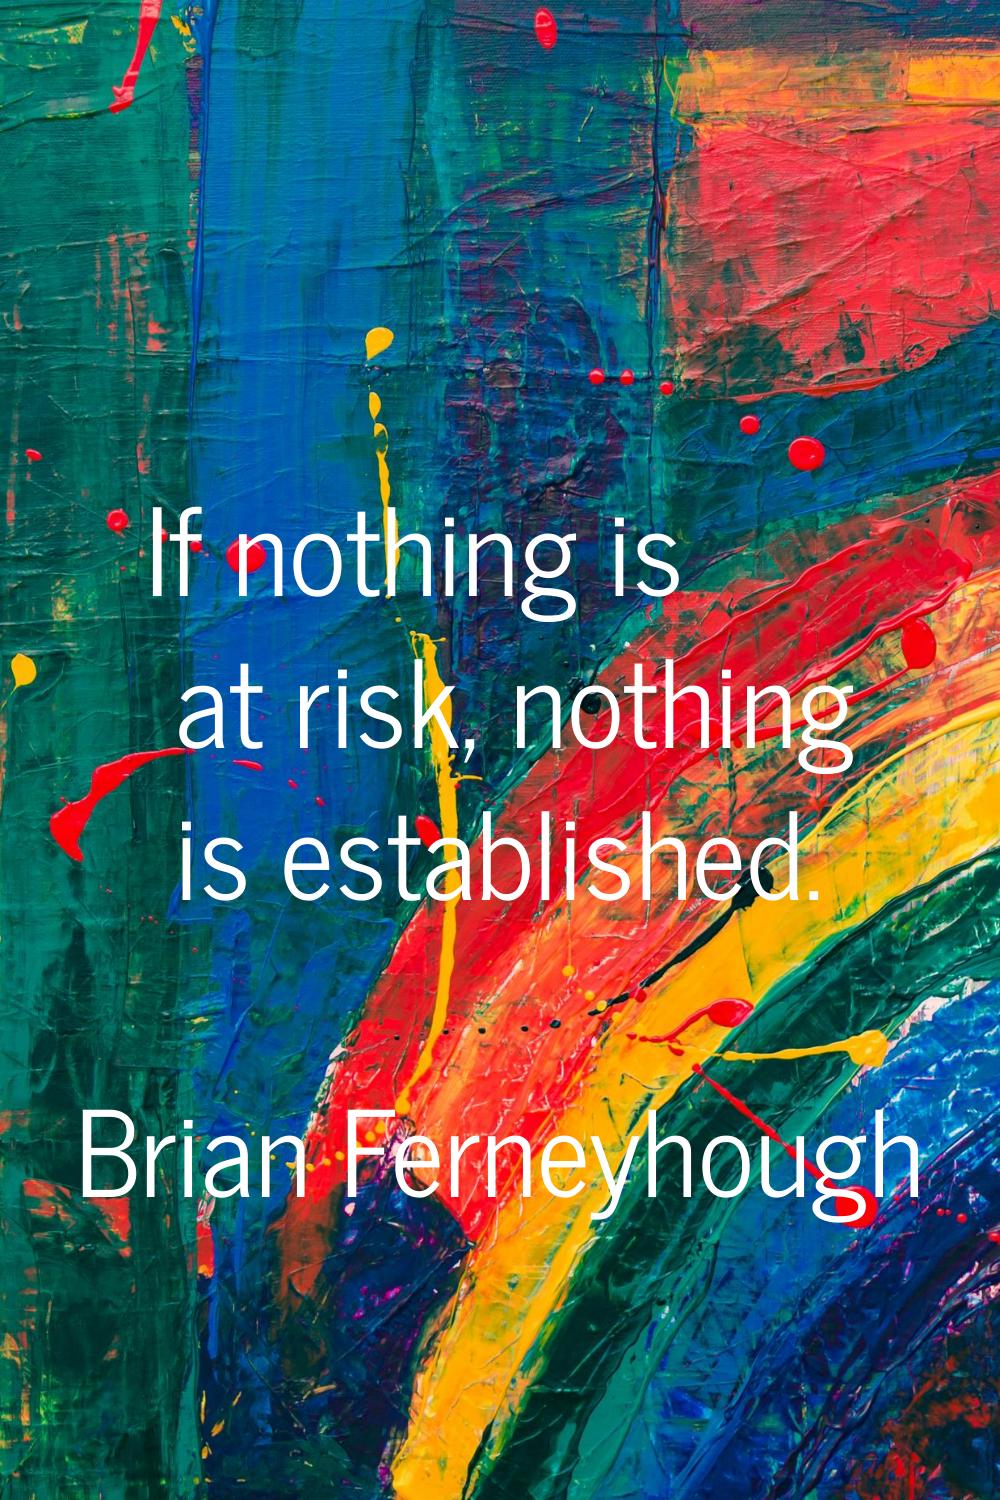 If nothing is at risk, nothing is established.